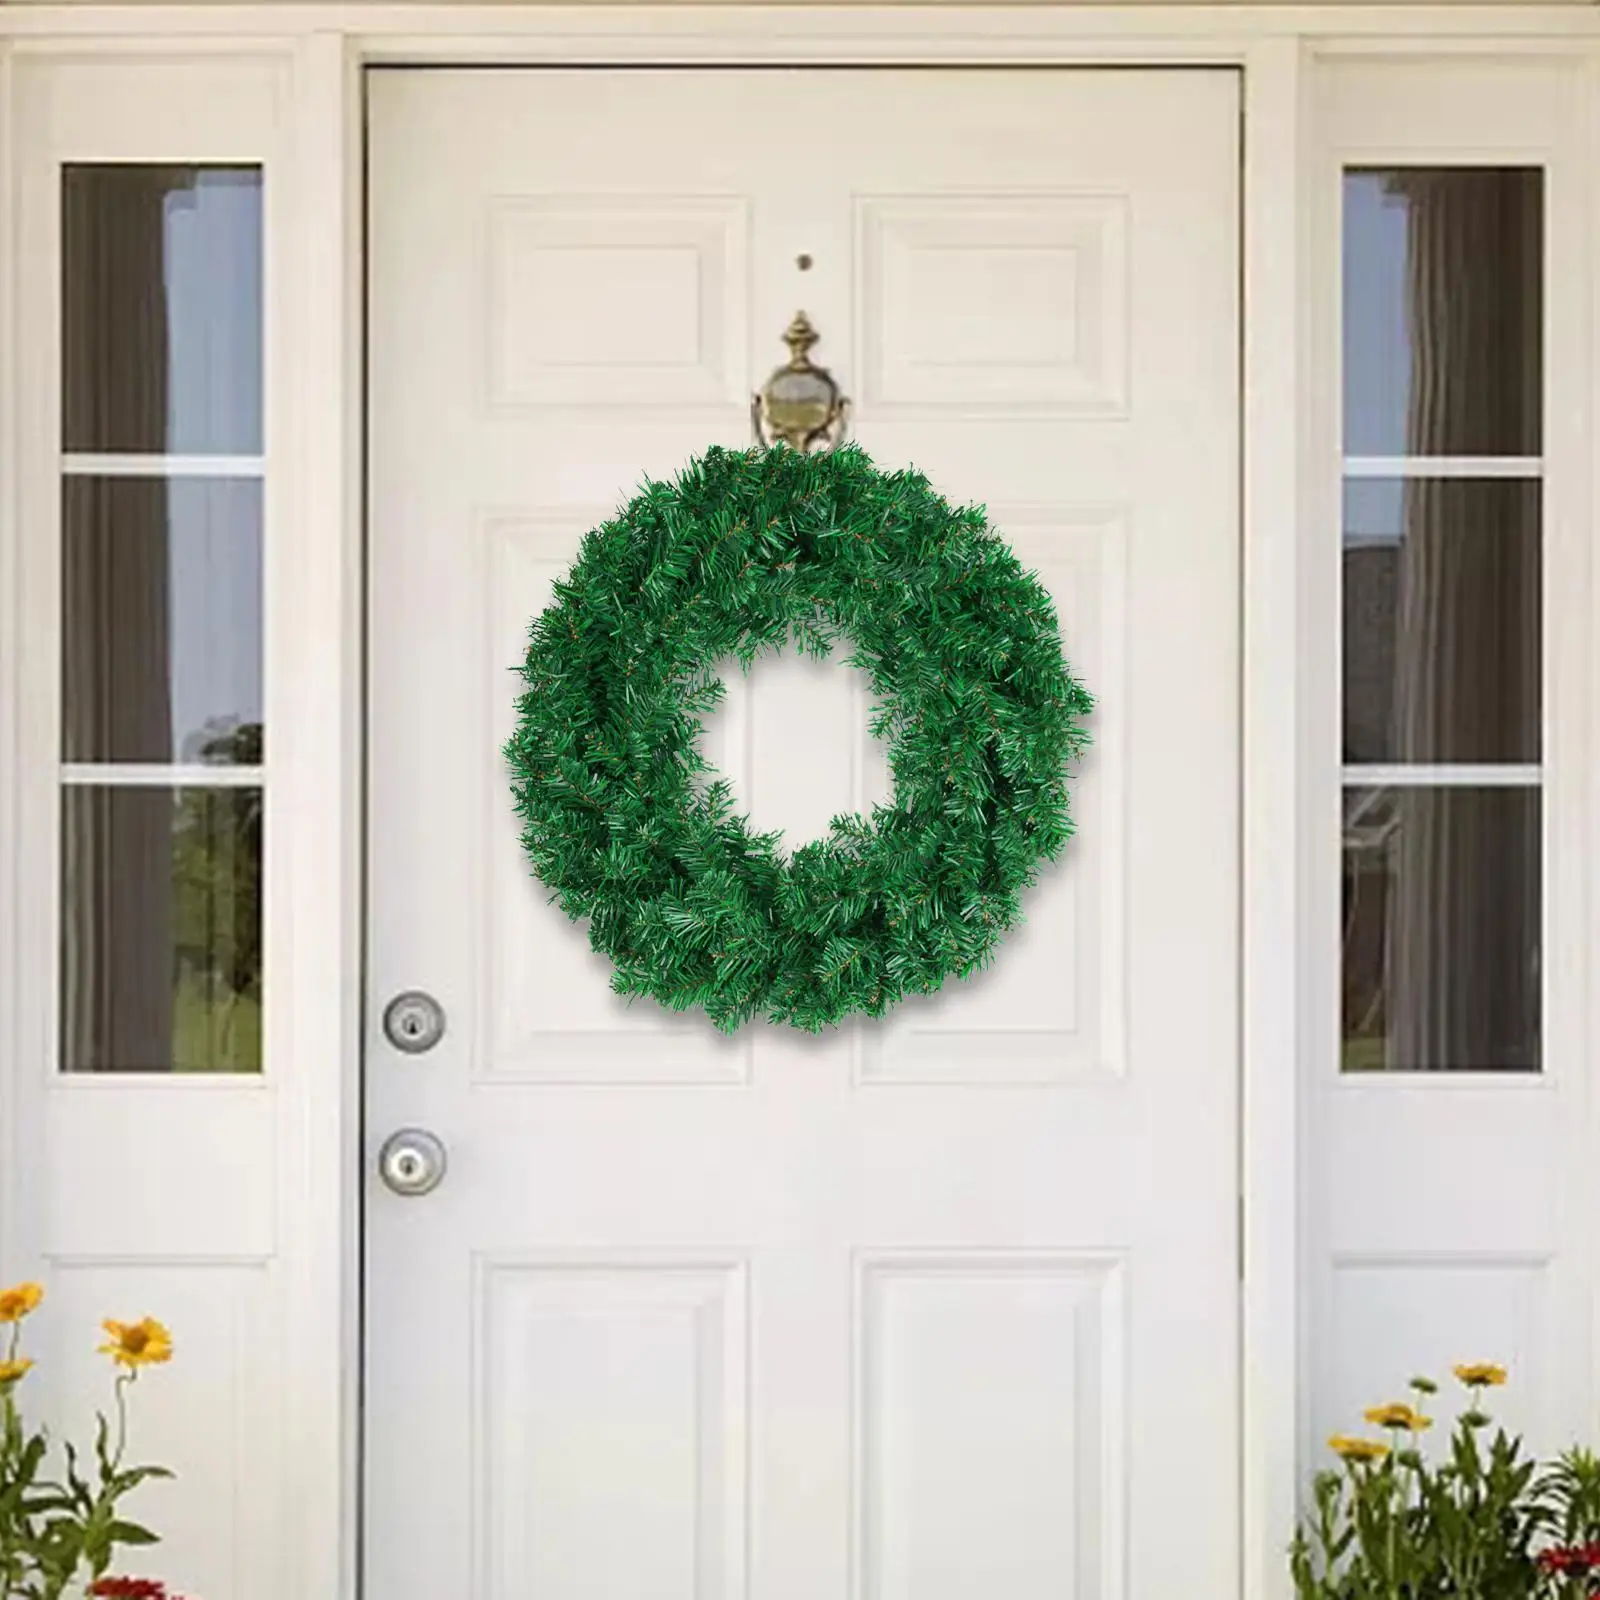 Green Artificial Wreath Christmas Wreath Realistic Vivid for Party, Bars,